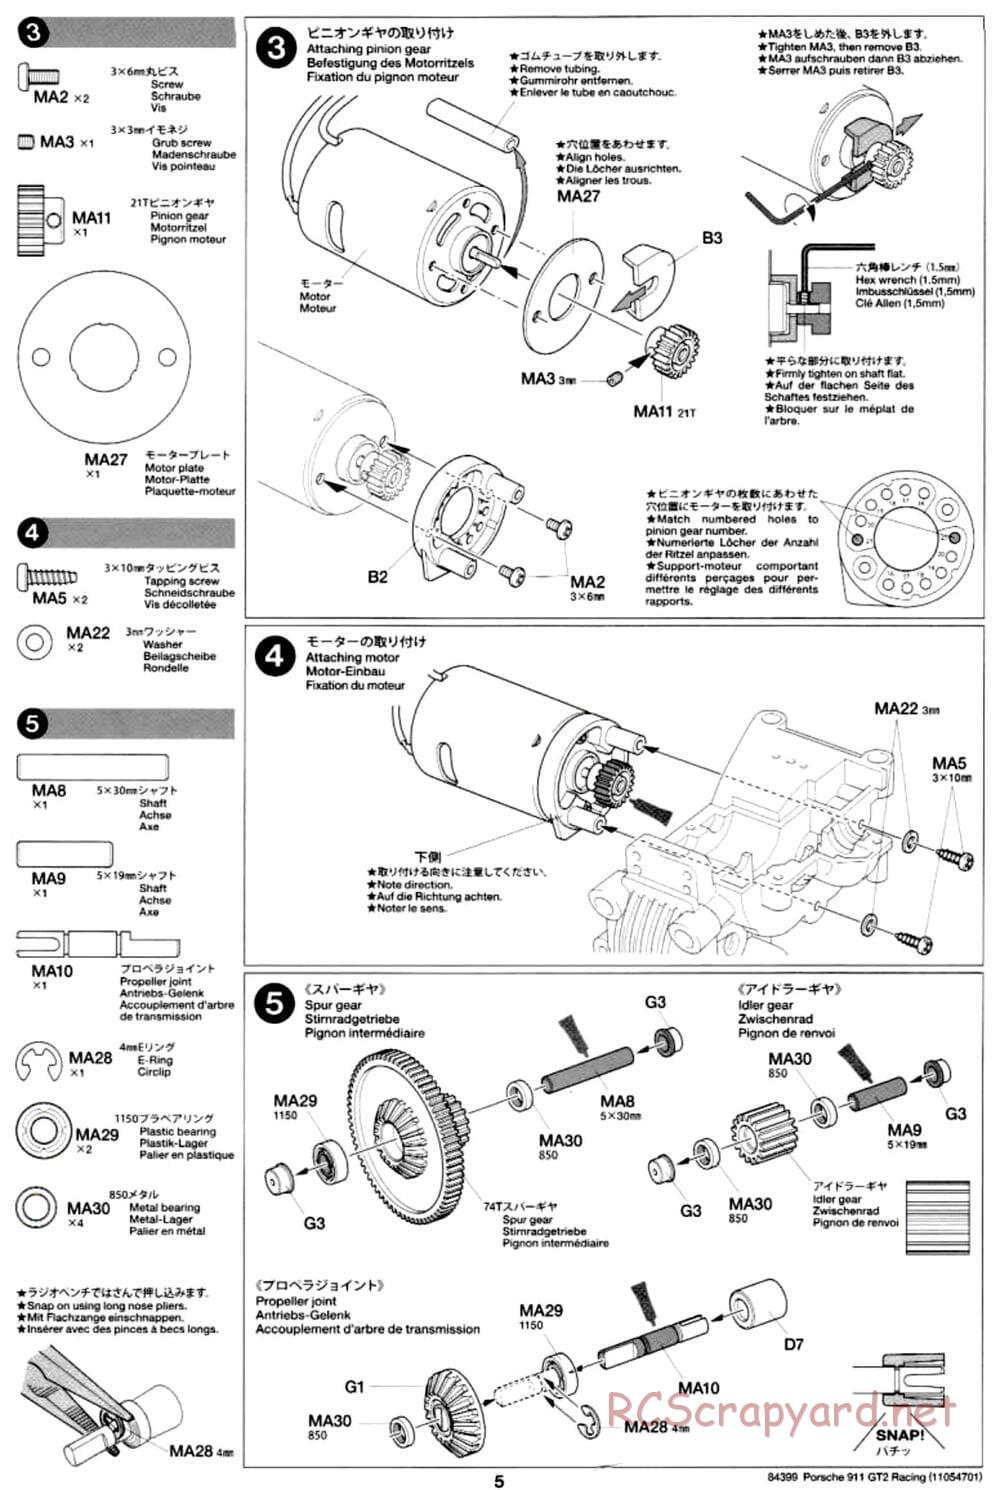 Tamiya - Porsche 911 GT2 Racing - TA02SW Chassis - Manual - Page 5